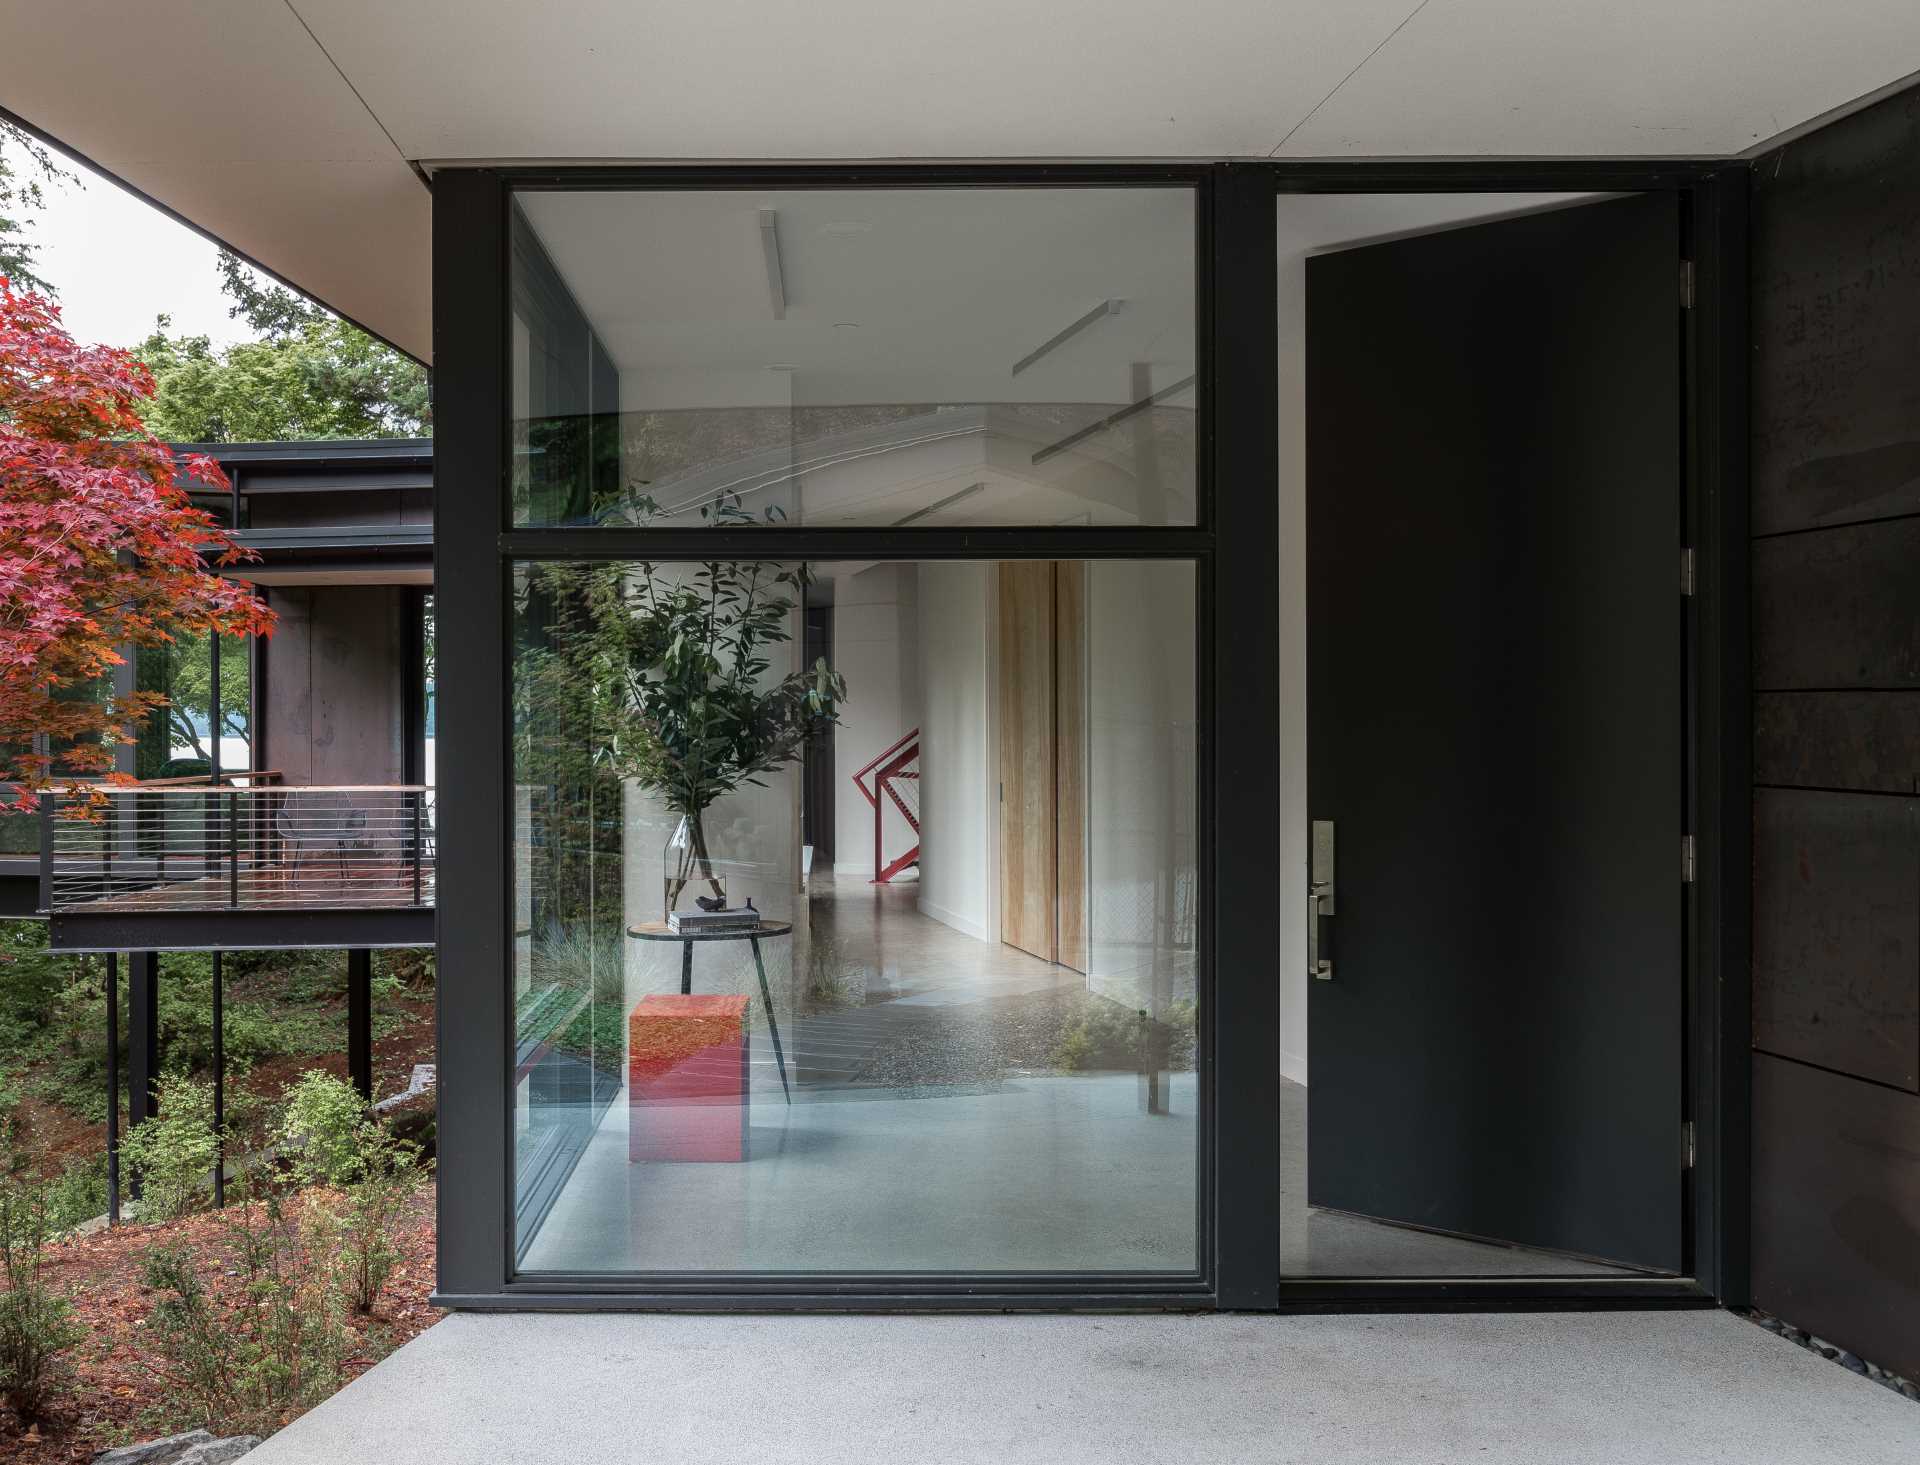 A contemporary home with white walls that contrast the blackened steel framing.